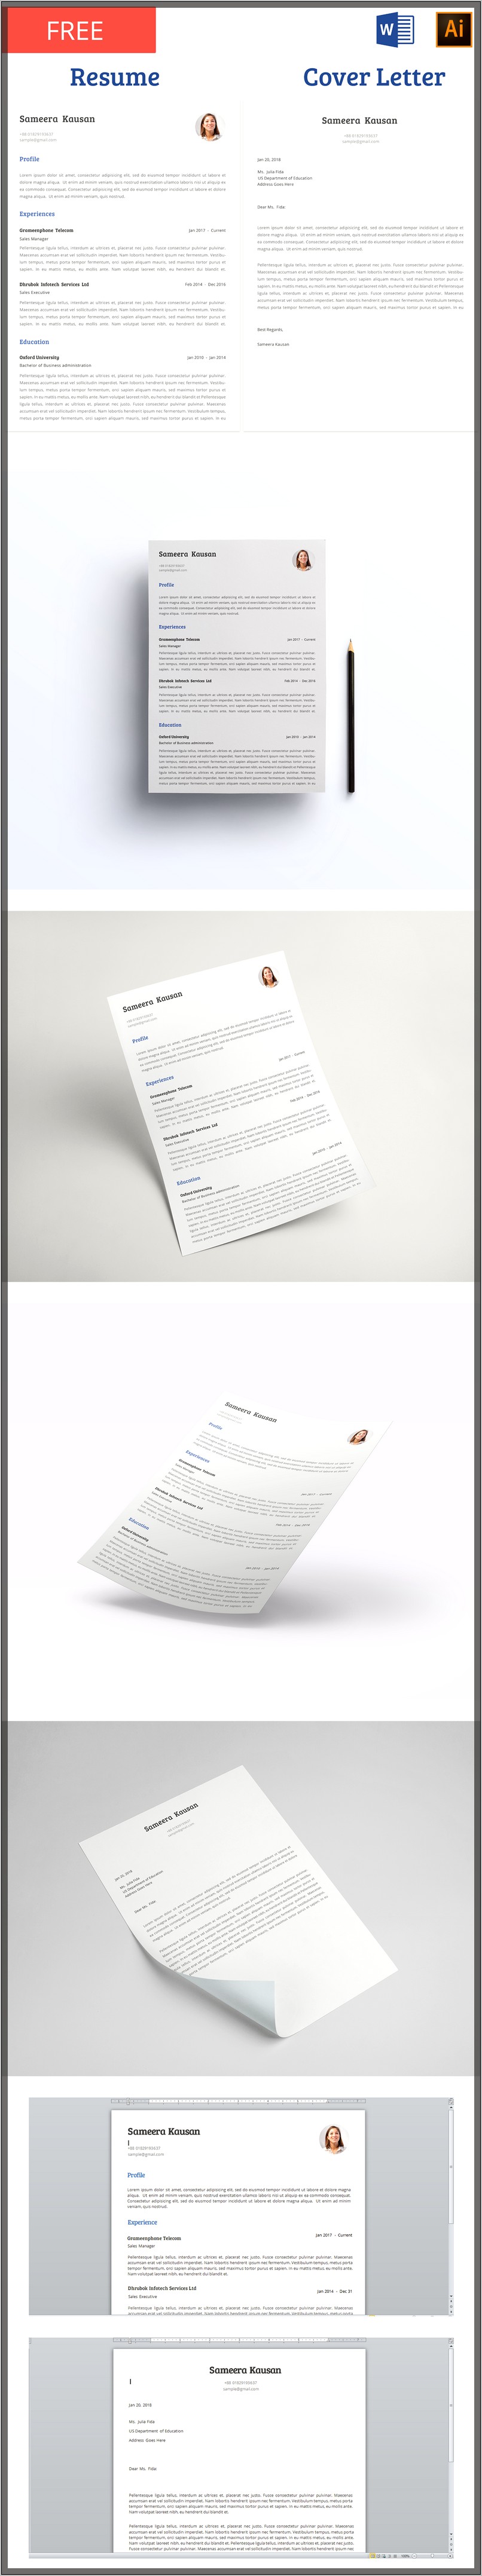 Photoshop Resume And Cover Letter Templates